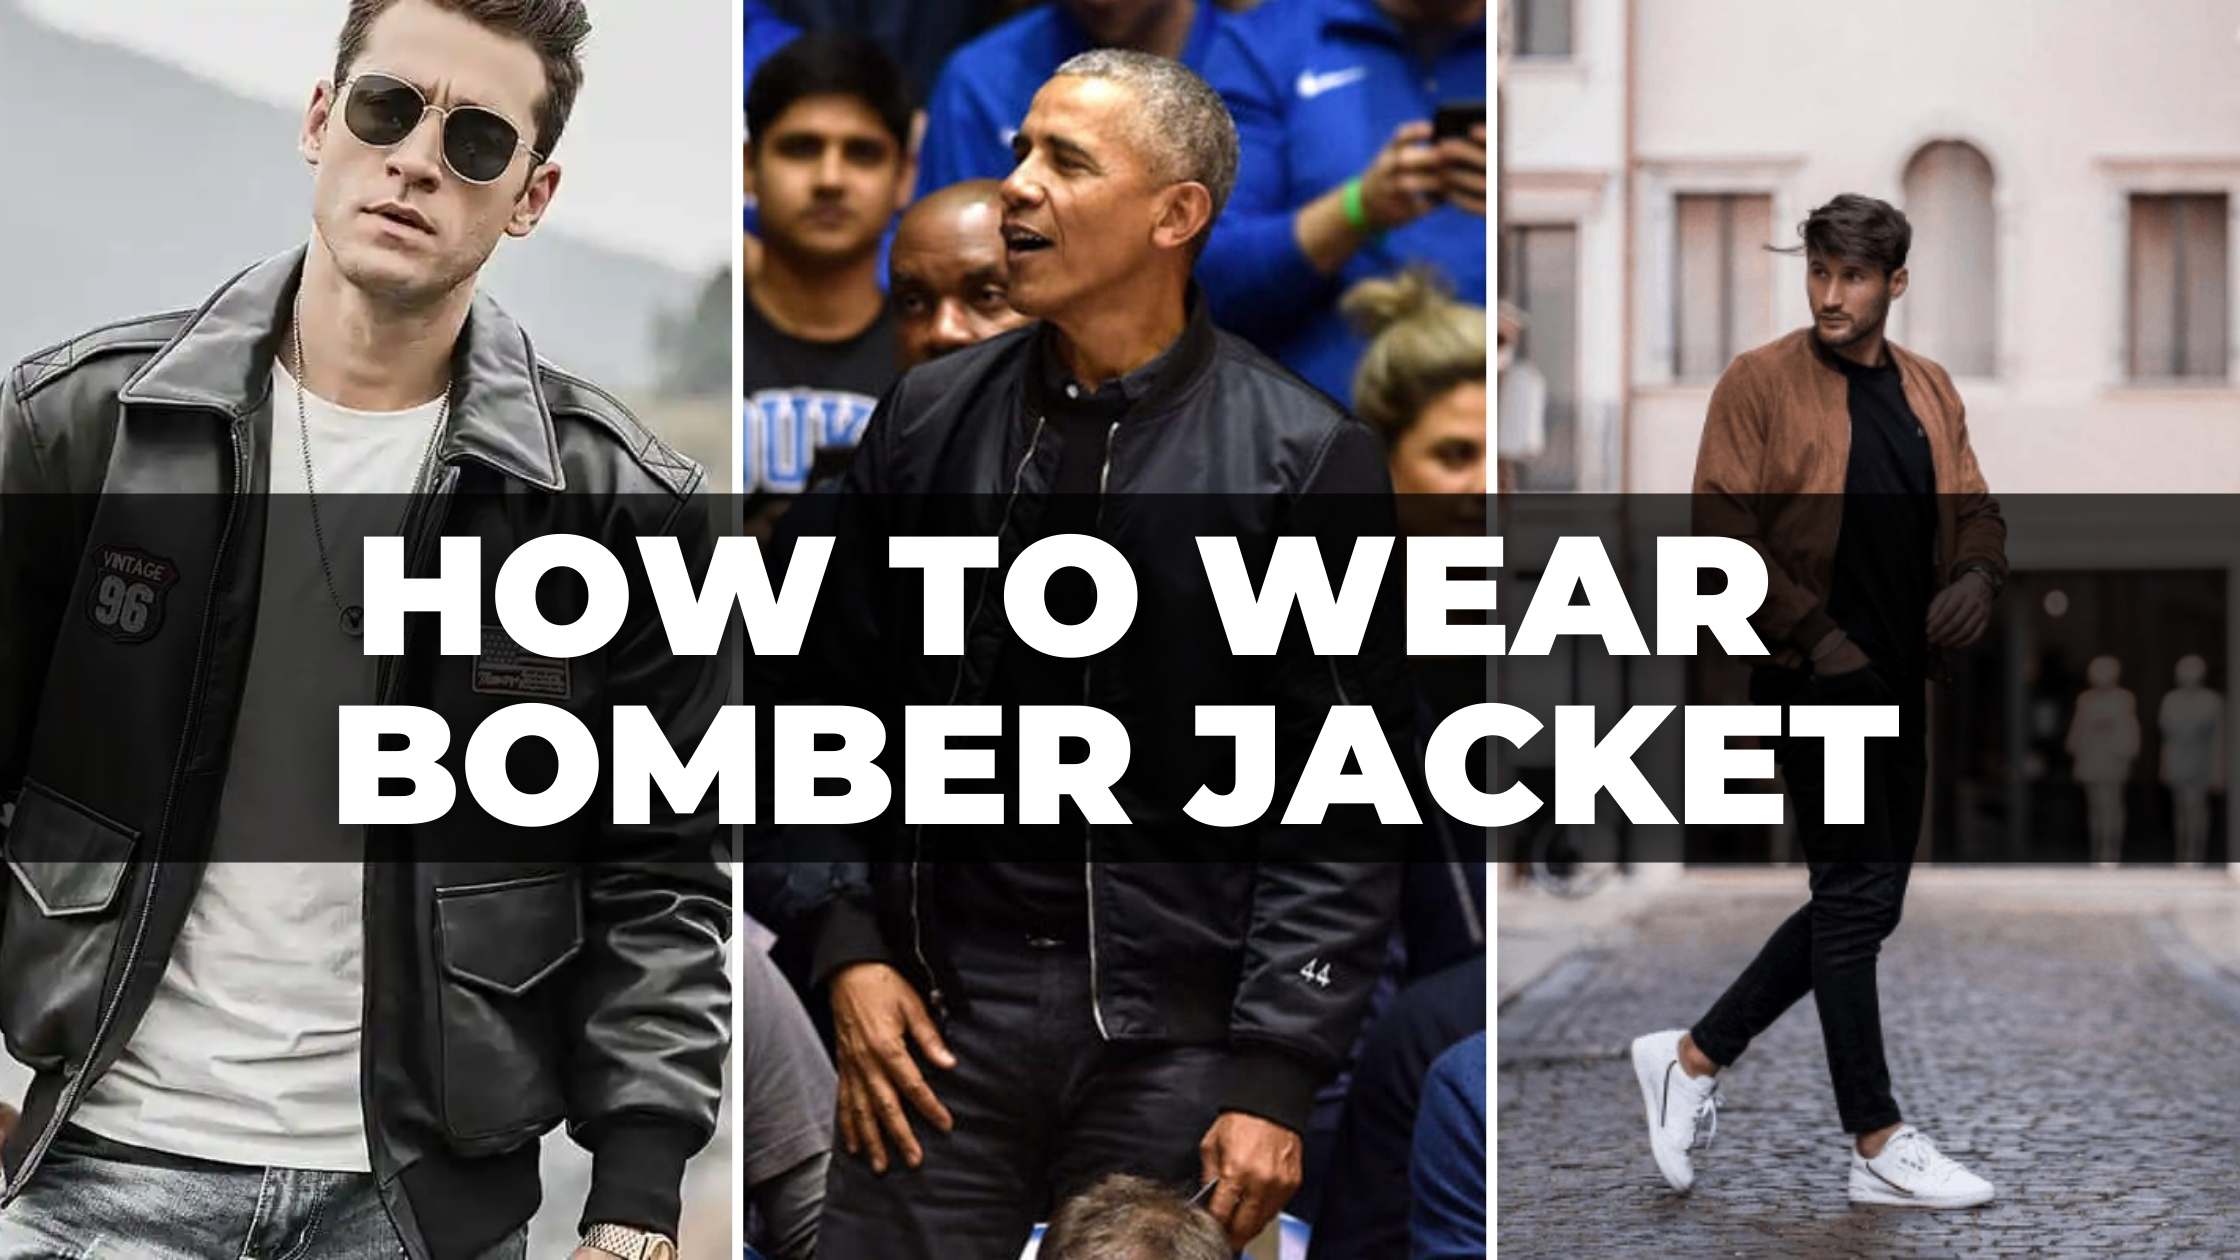 How to Wear Bomber Jacket